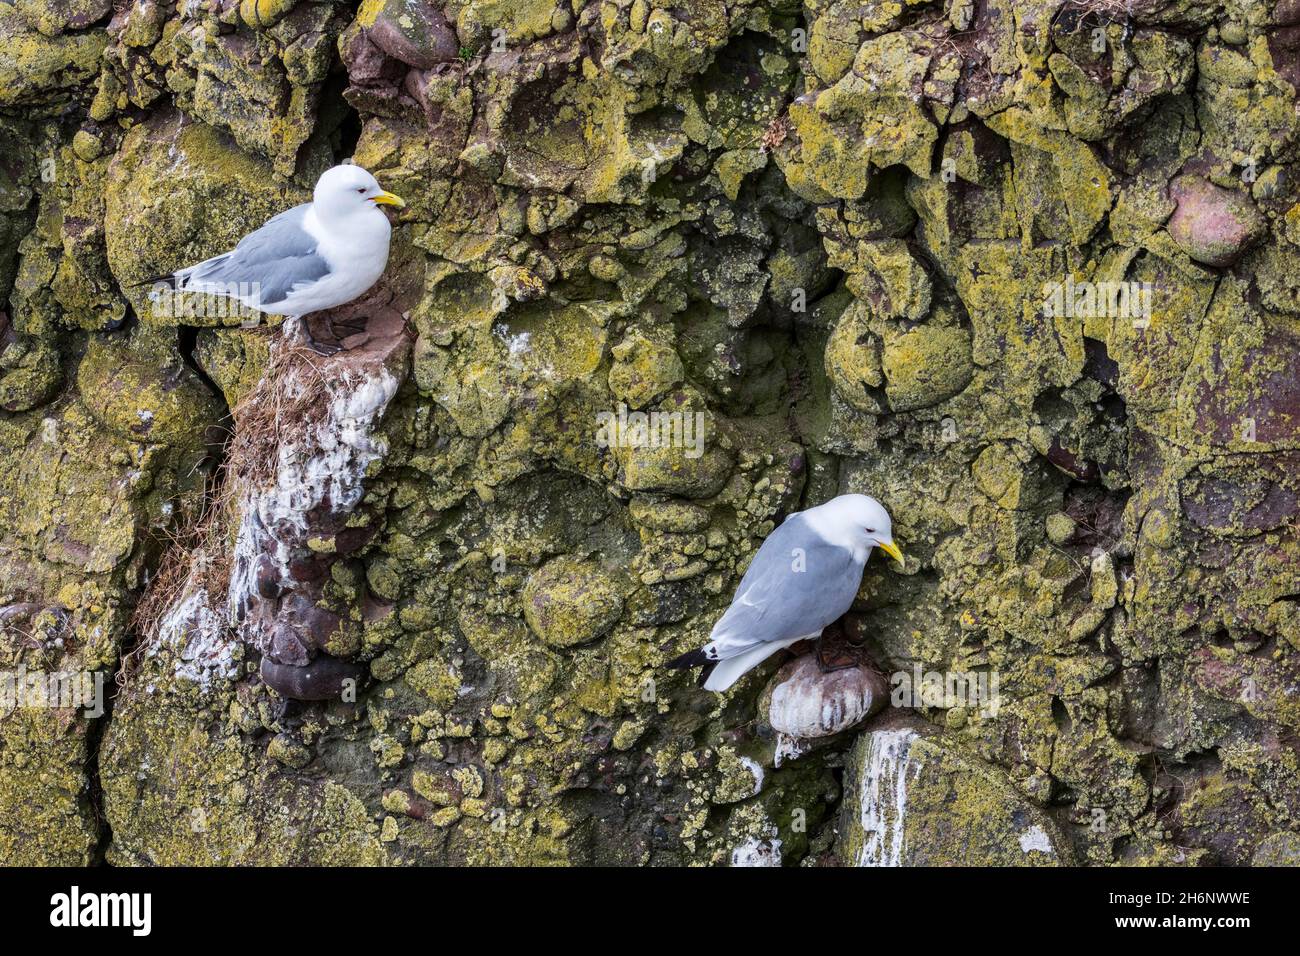 Kittiwake (Rissa tridactyla) nesting on rocky outcrops in the cliff face of a seabird colony, Fowlsheugh, Aberdeenshire, Scotland, UK Stock Photo